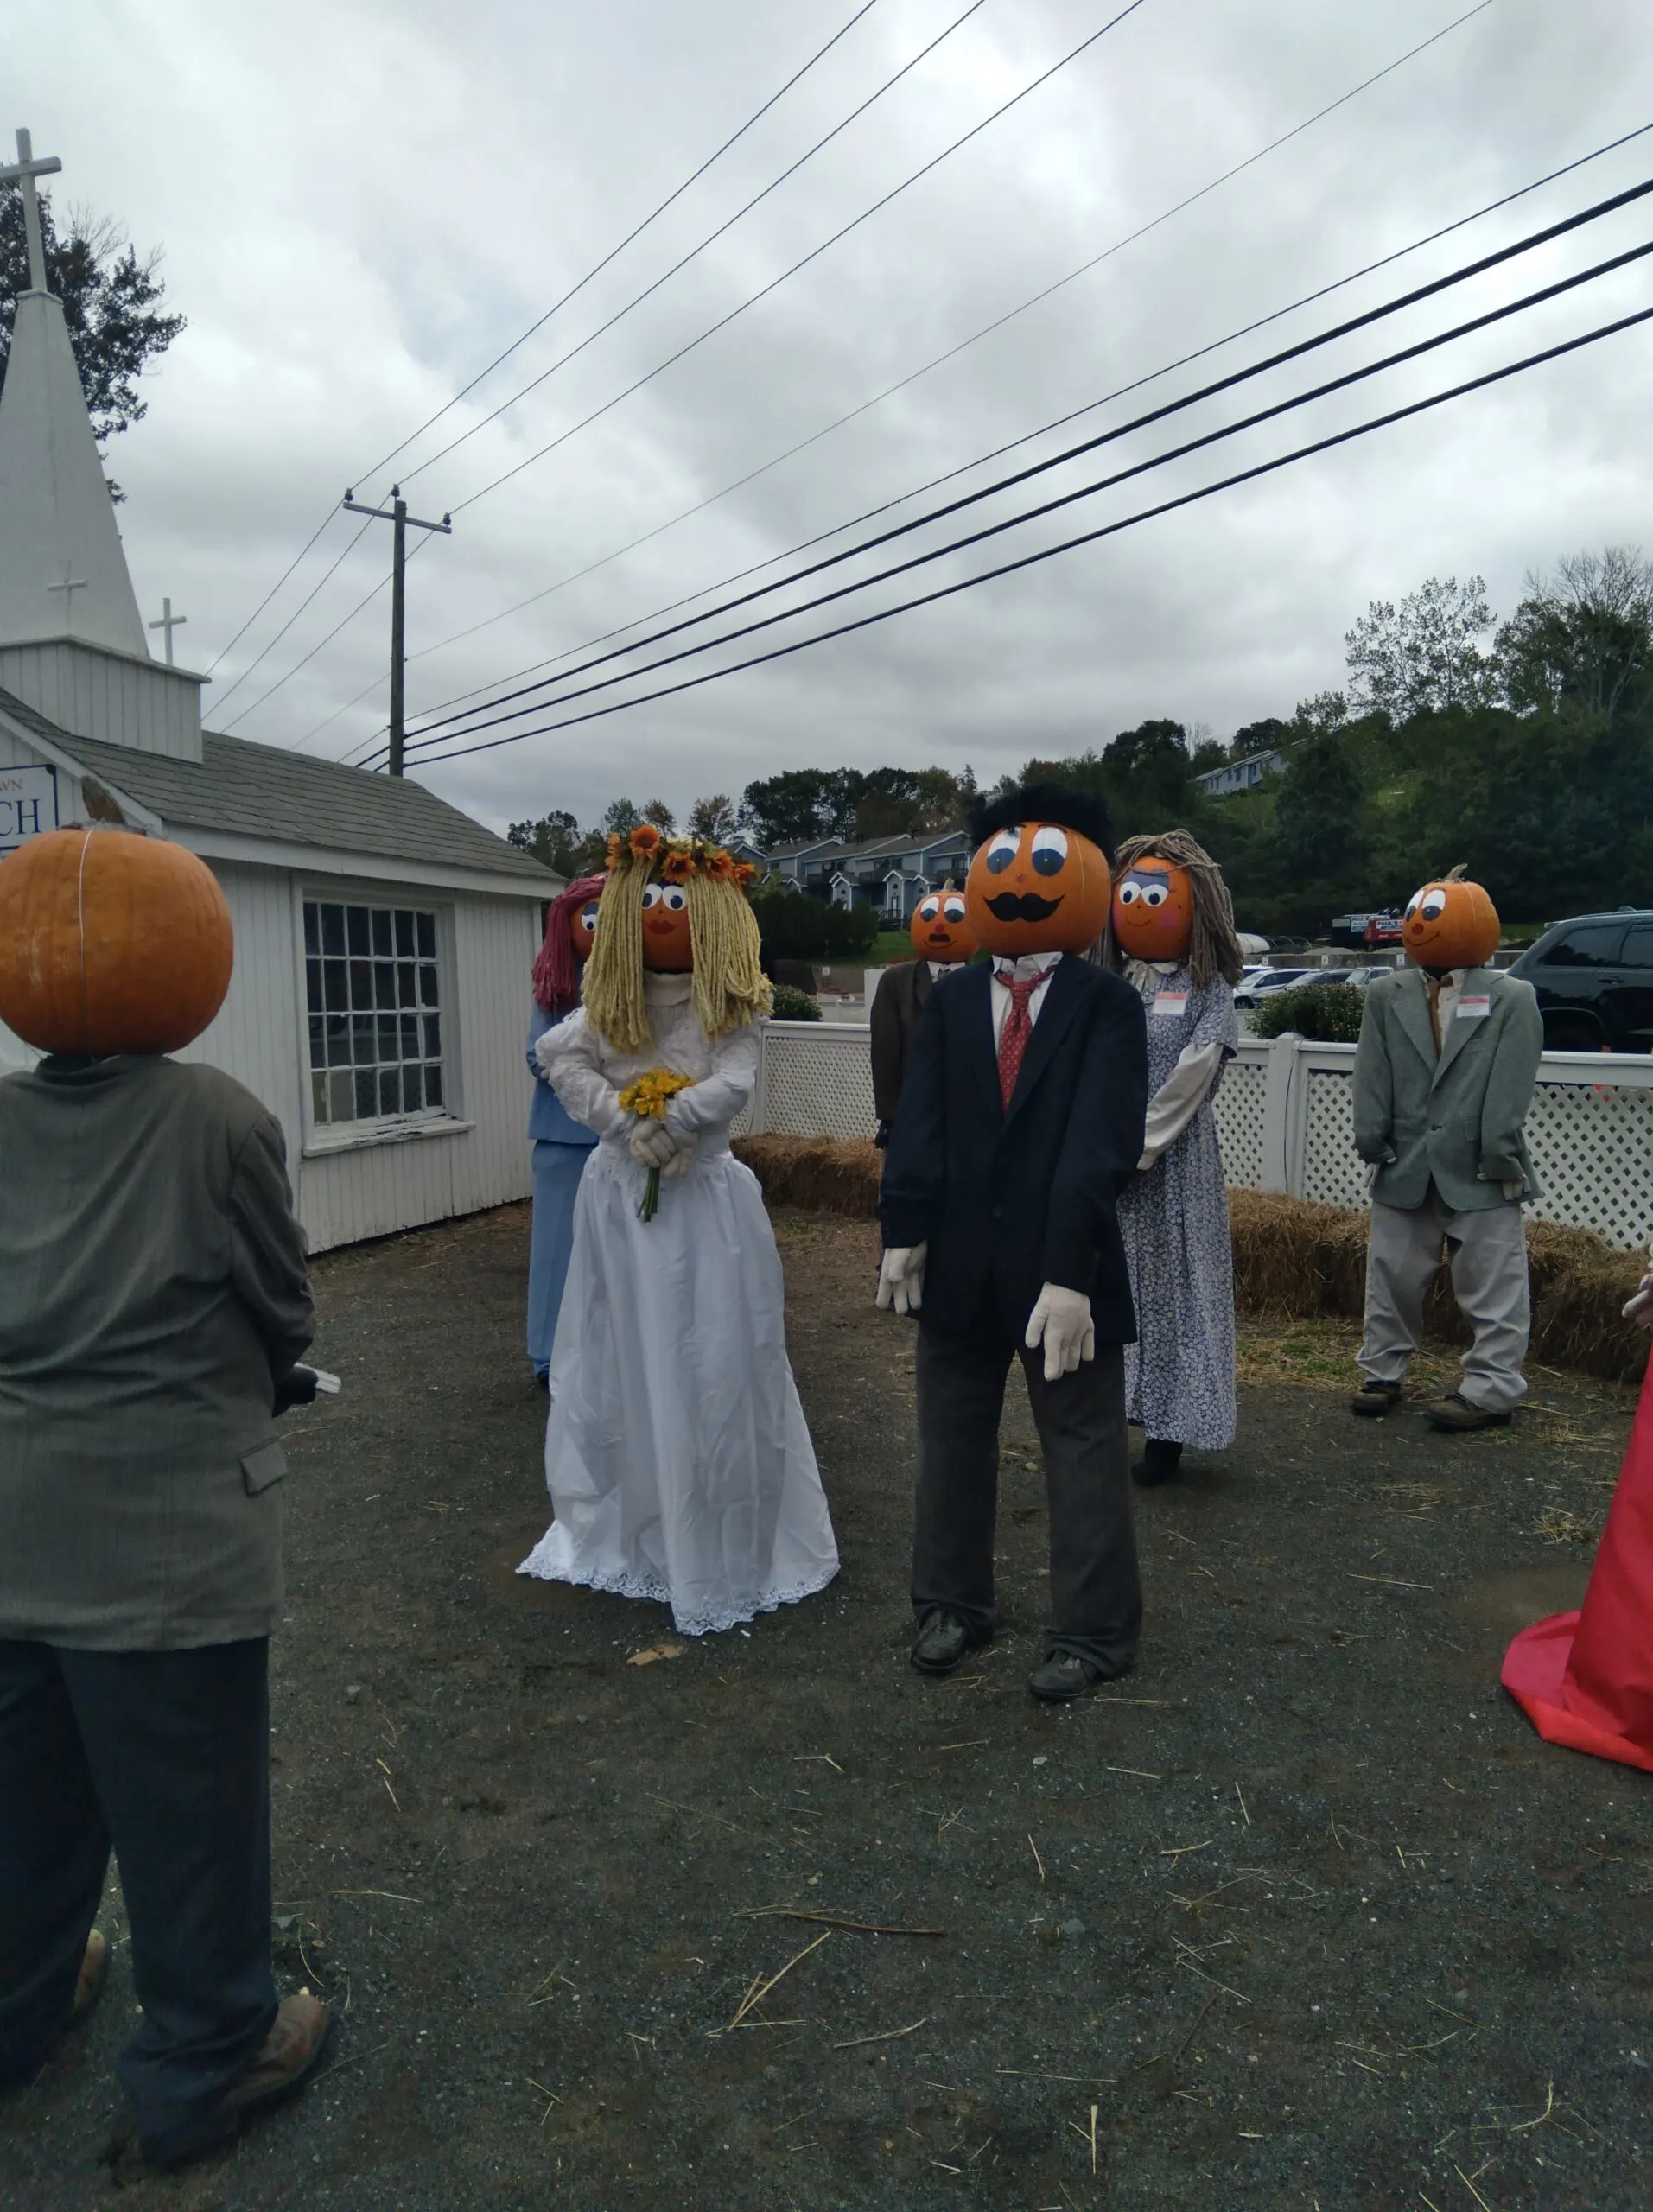 Image of people with pumpkin heads getting married in pumpkintown in ct.